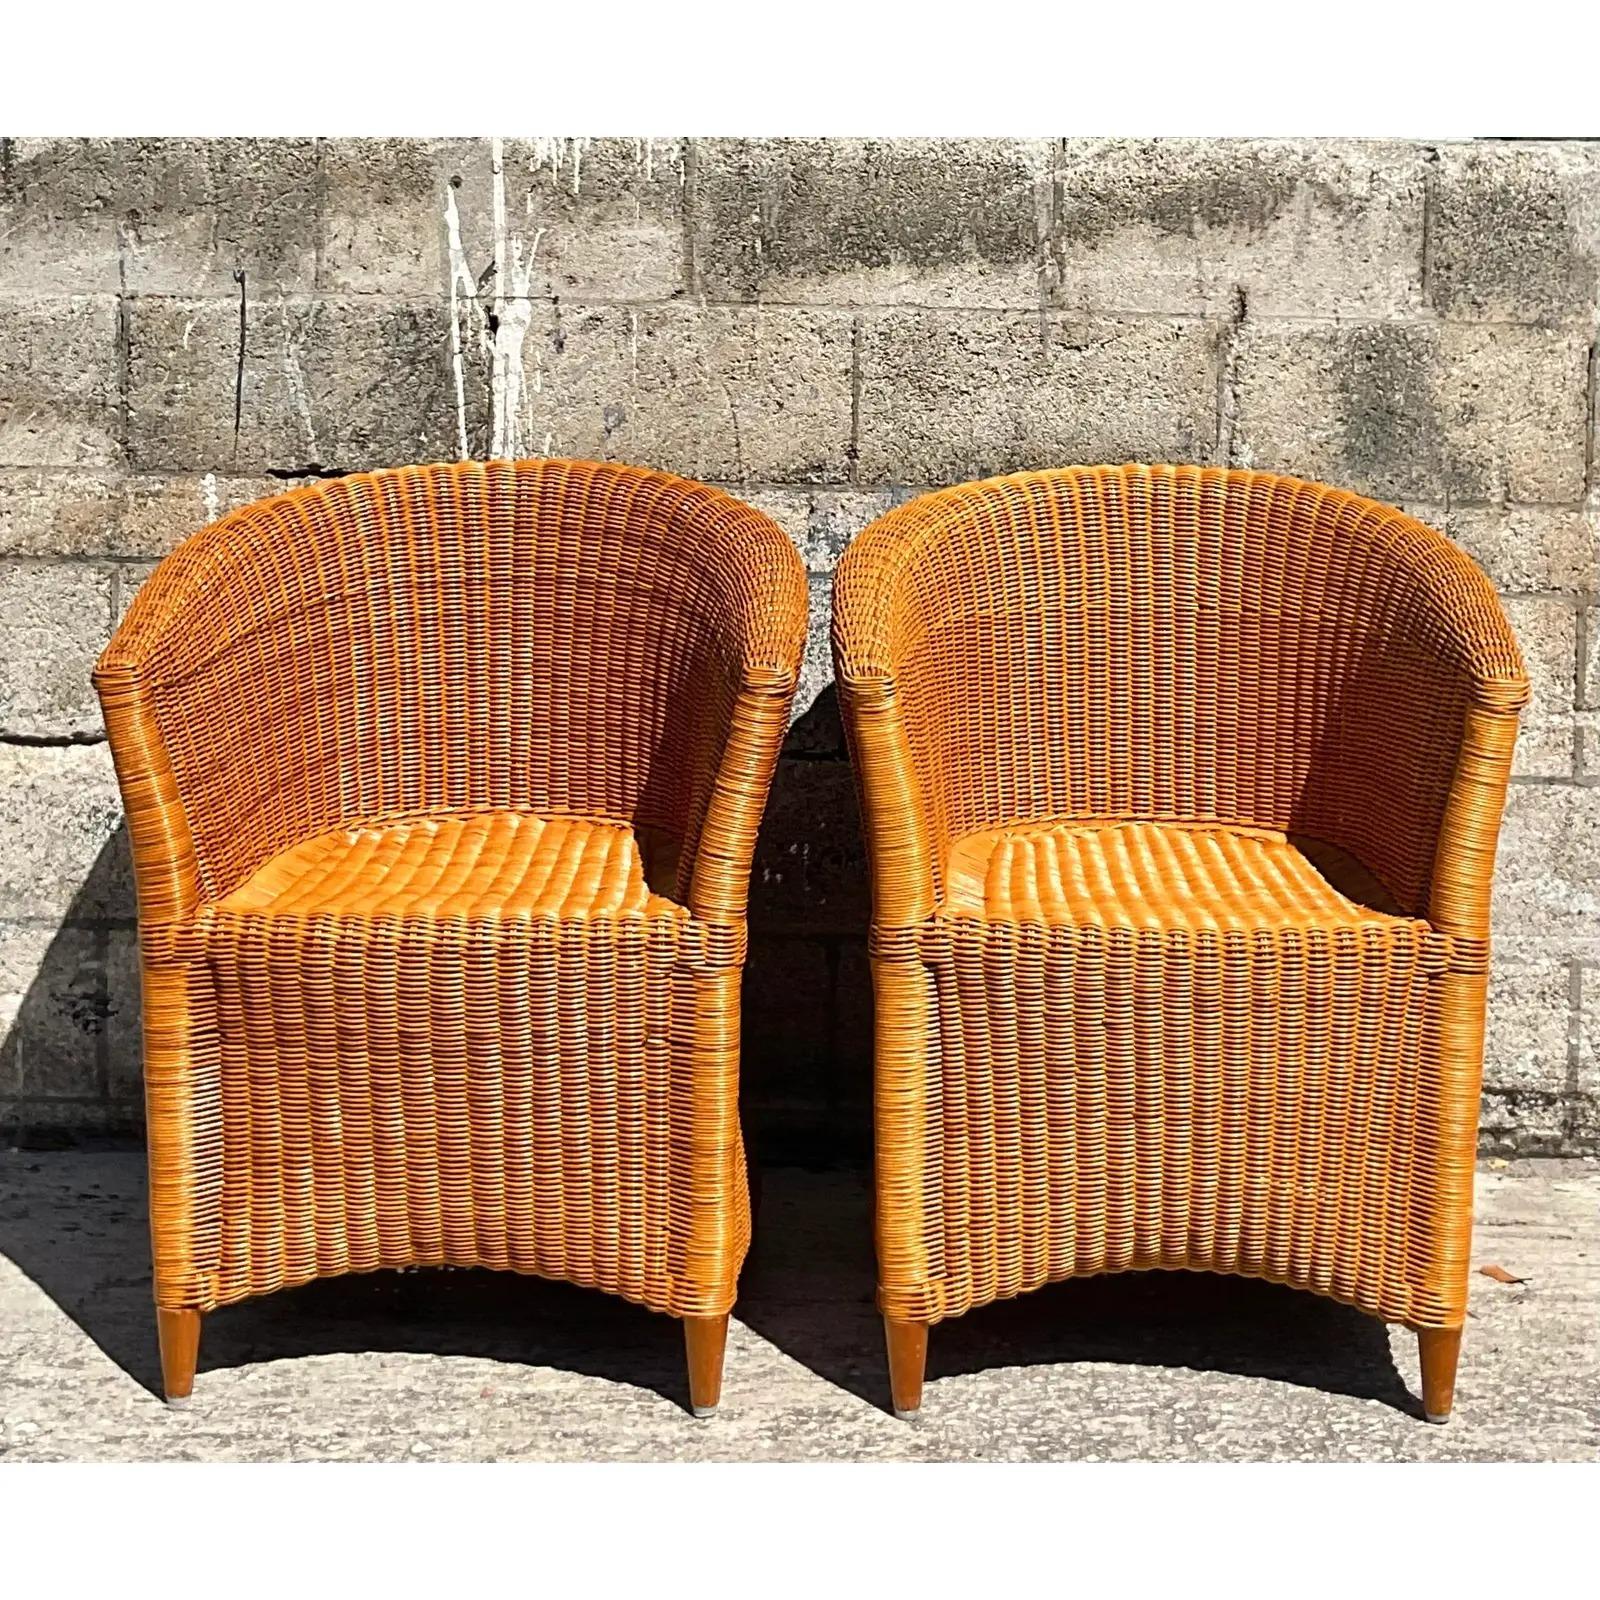 Fabulous pair of vintage Coastal tub chairs. Beautiful warm woven rattan in a contemporary design. Cushions included. Acquired from a Palm Beach estate.